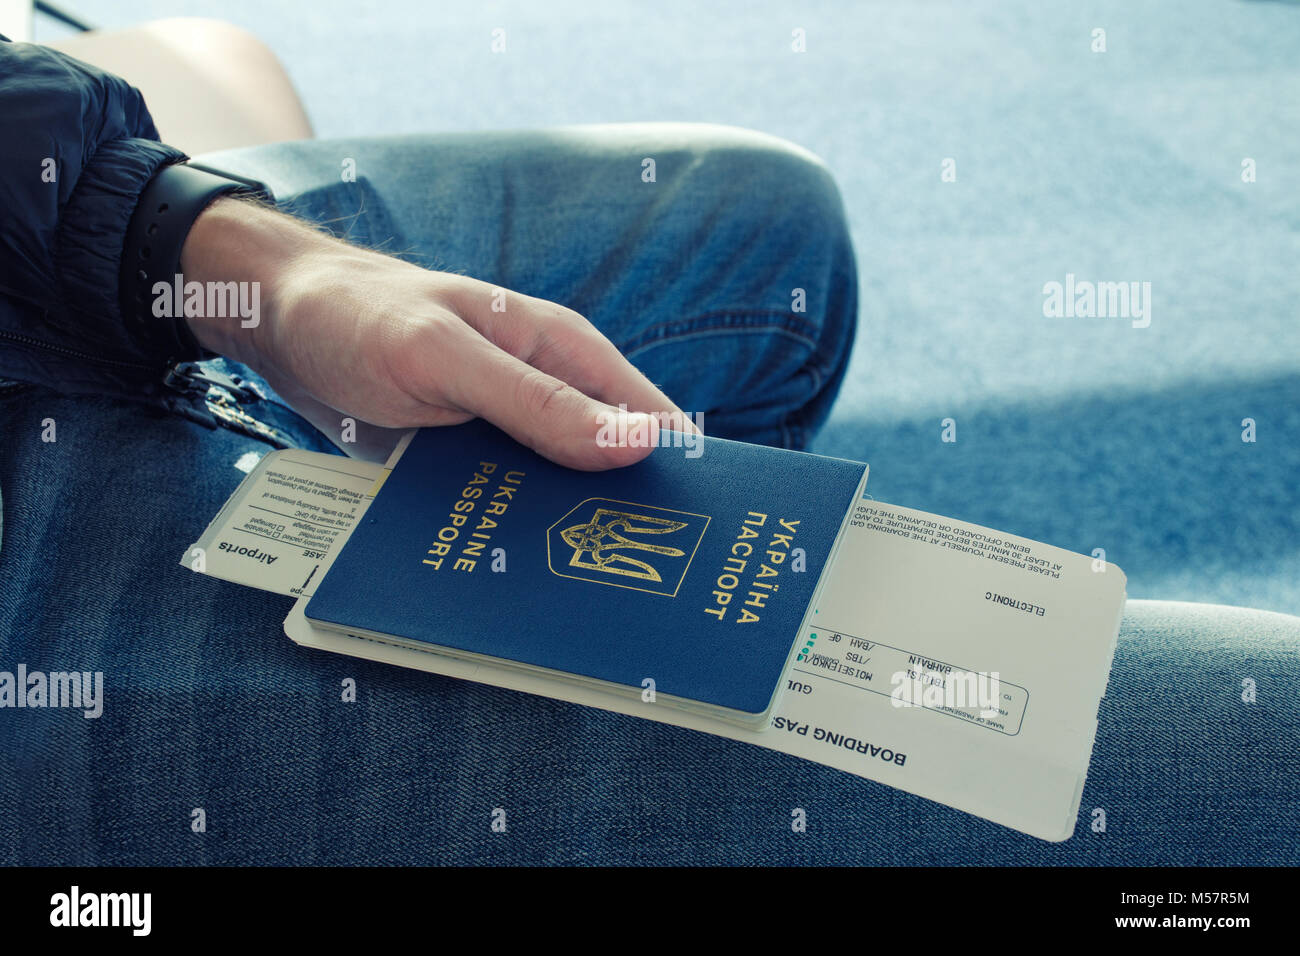 Young men in jeans holding in hand foreign passport of Ukraine with airplane ticket attached to it. Stock Photo